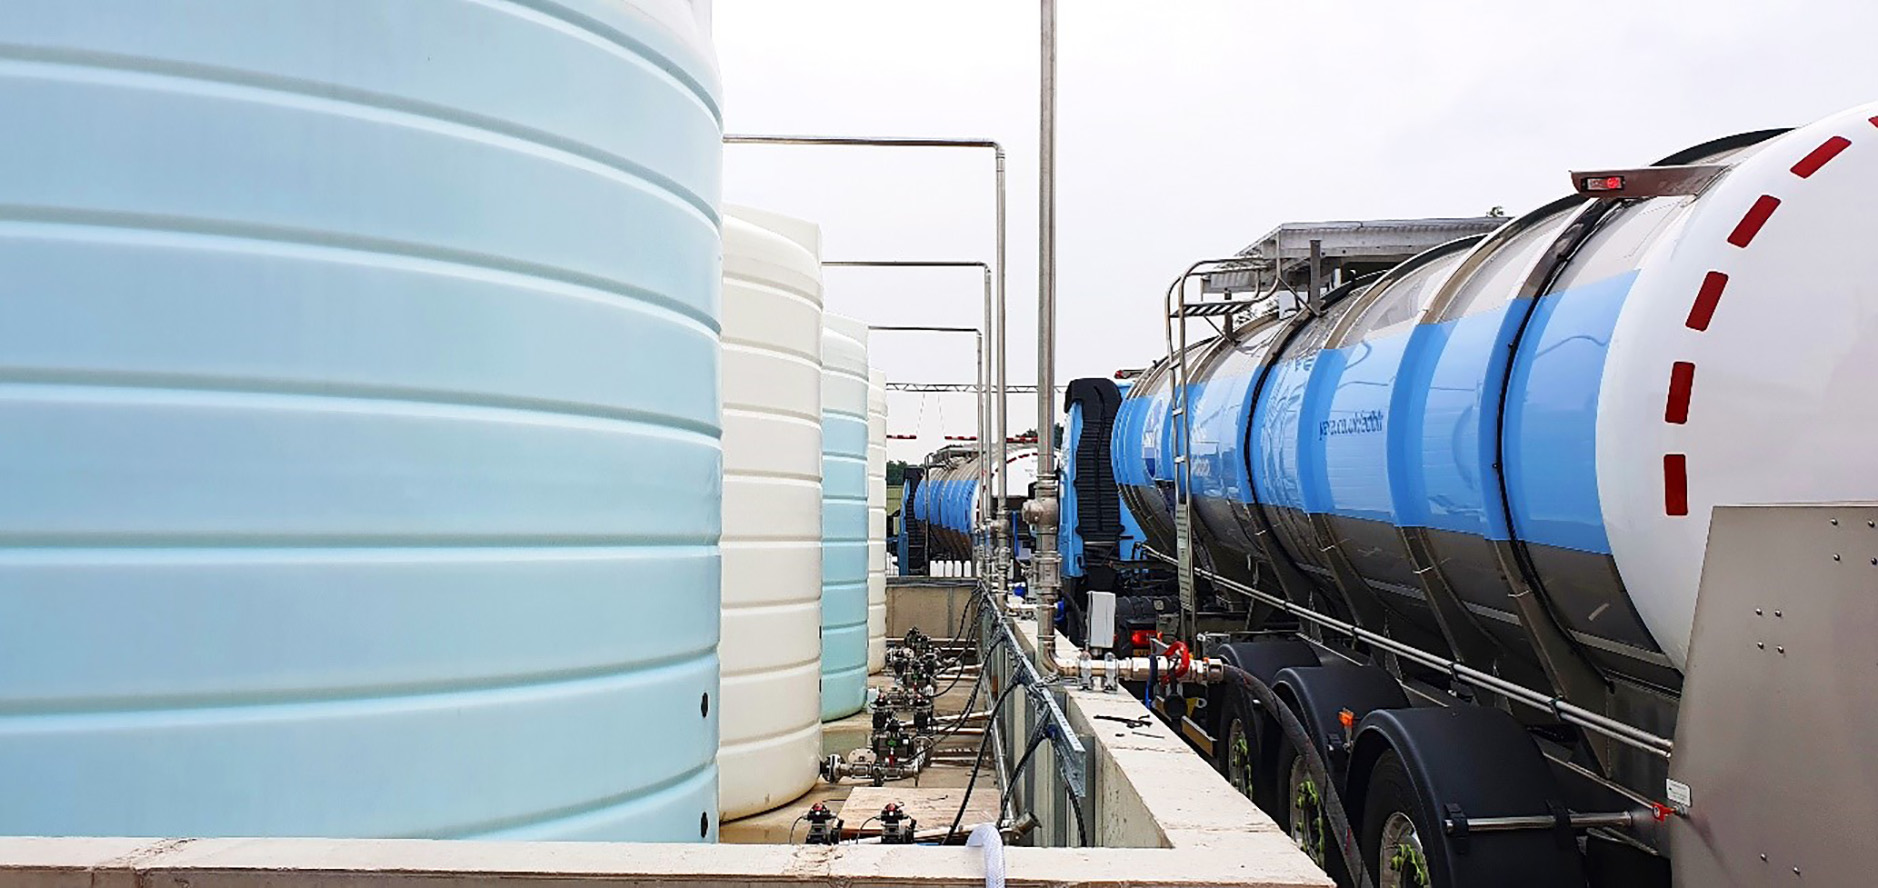 Each tank features separate pipework, which prevents cross contamination.